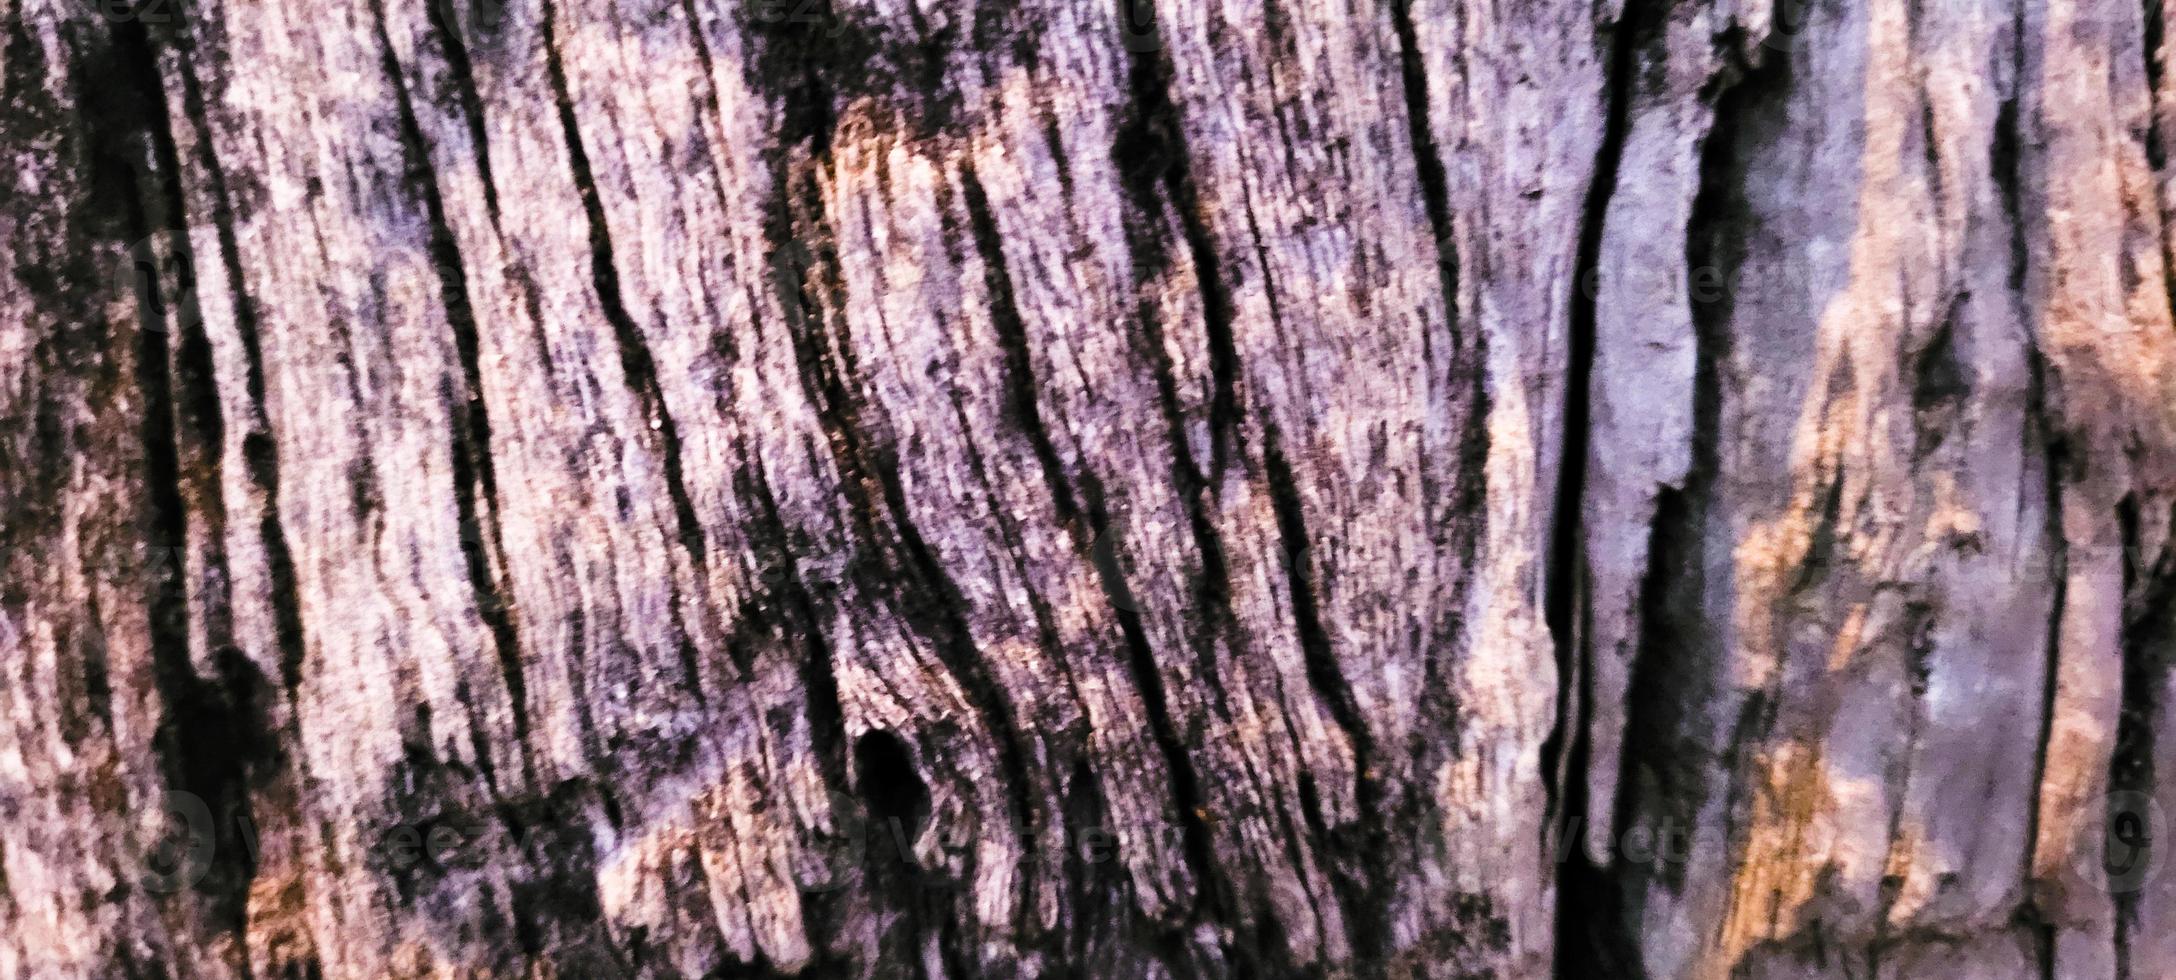 rustic old wooden log with texture photo